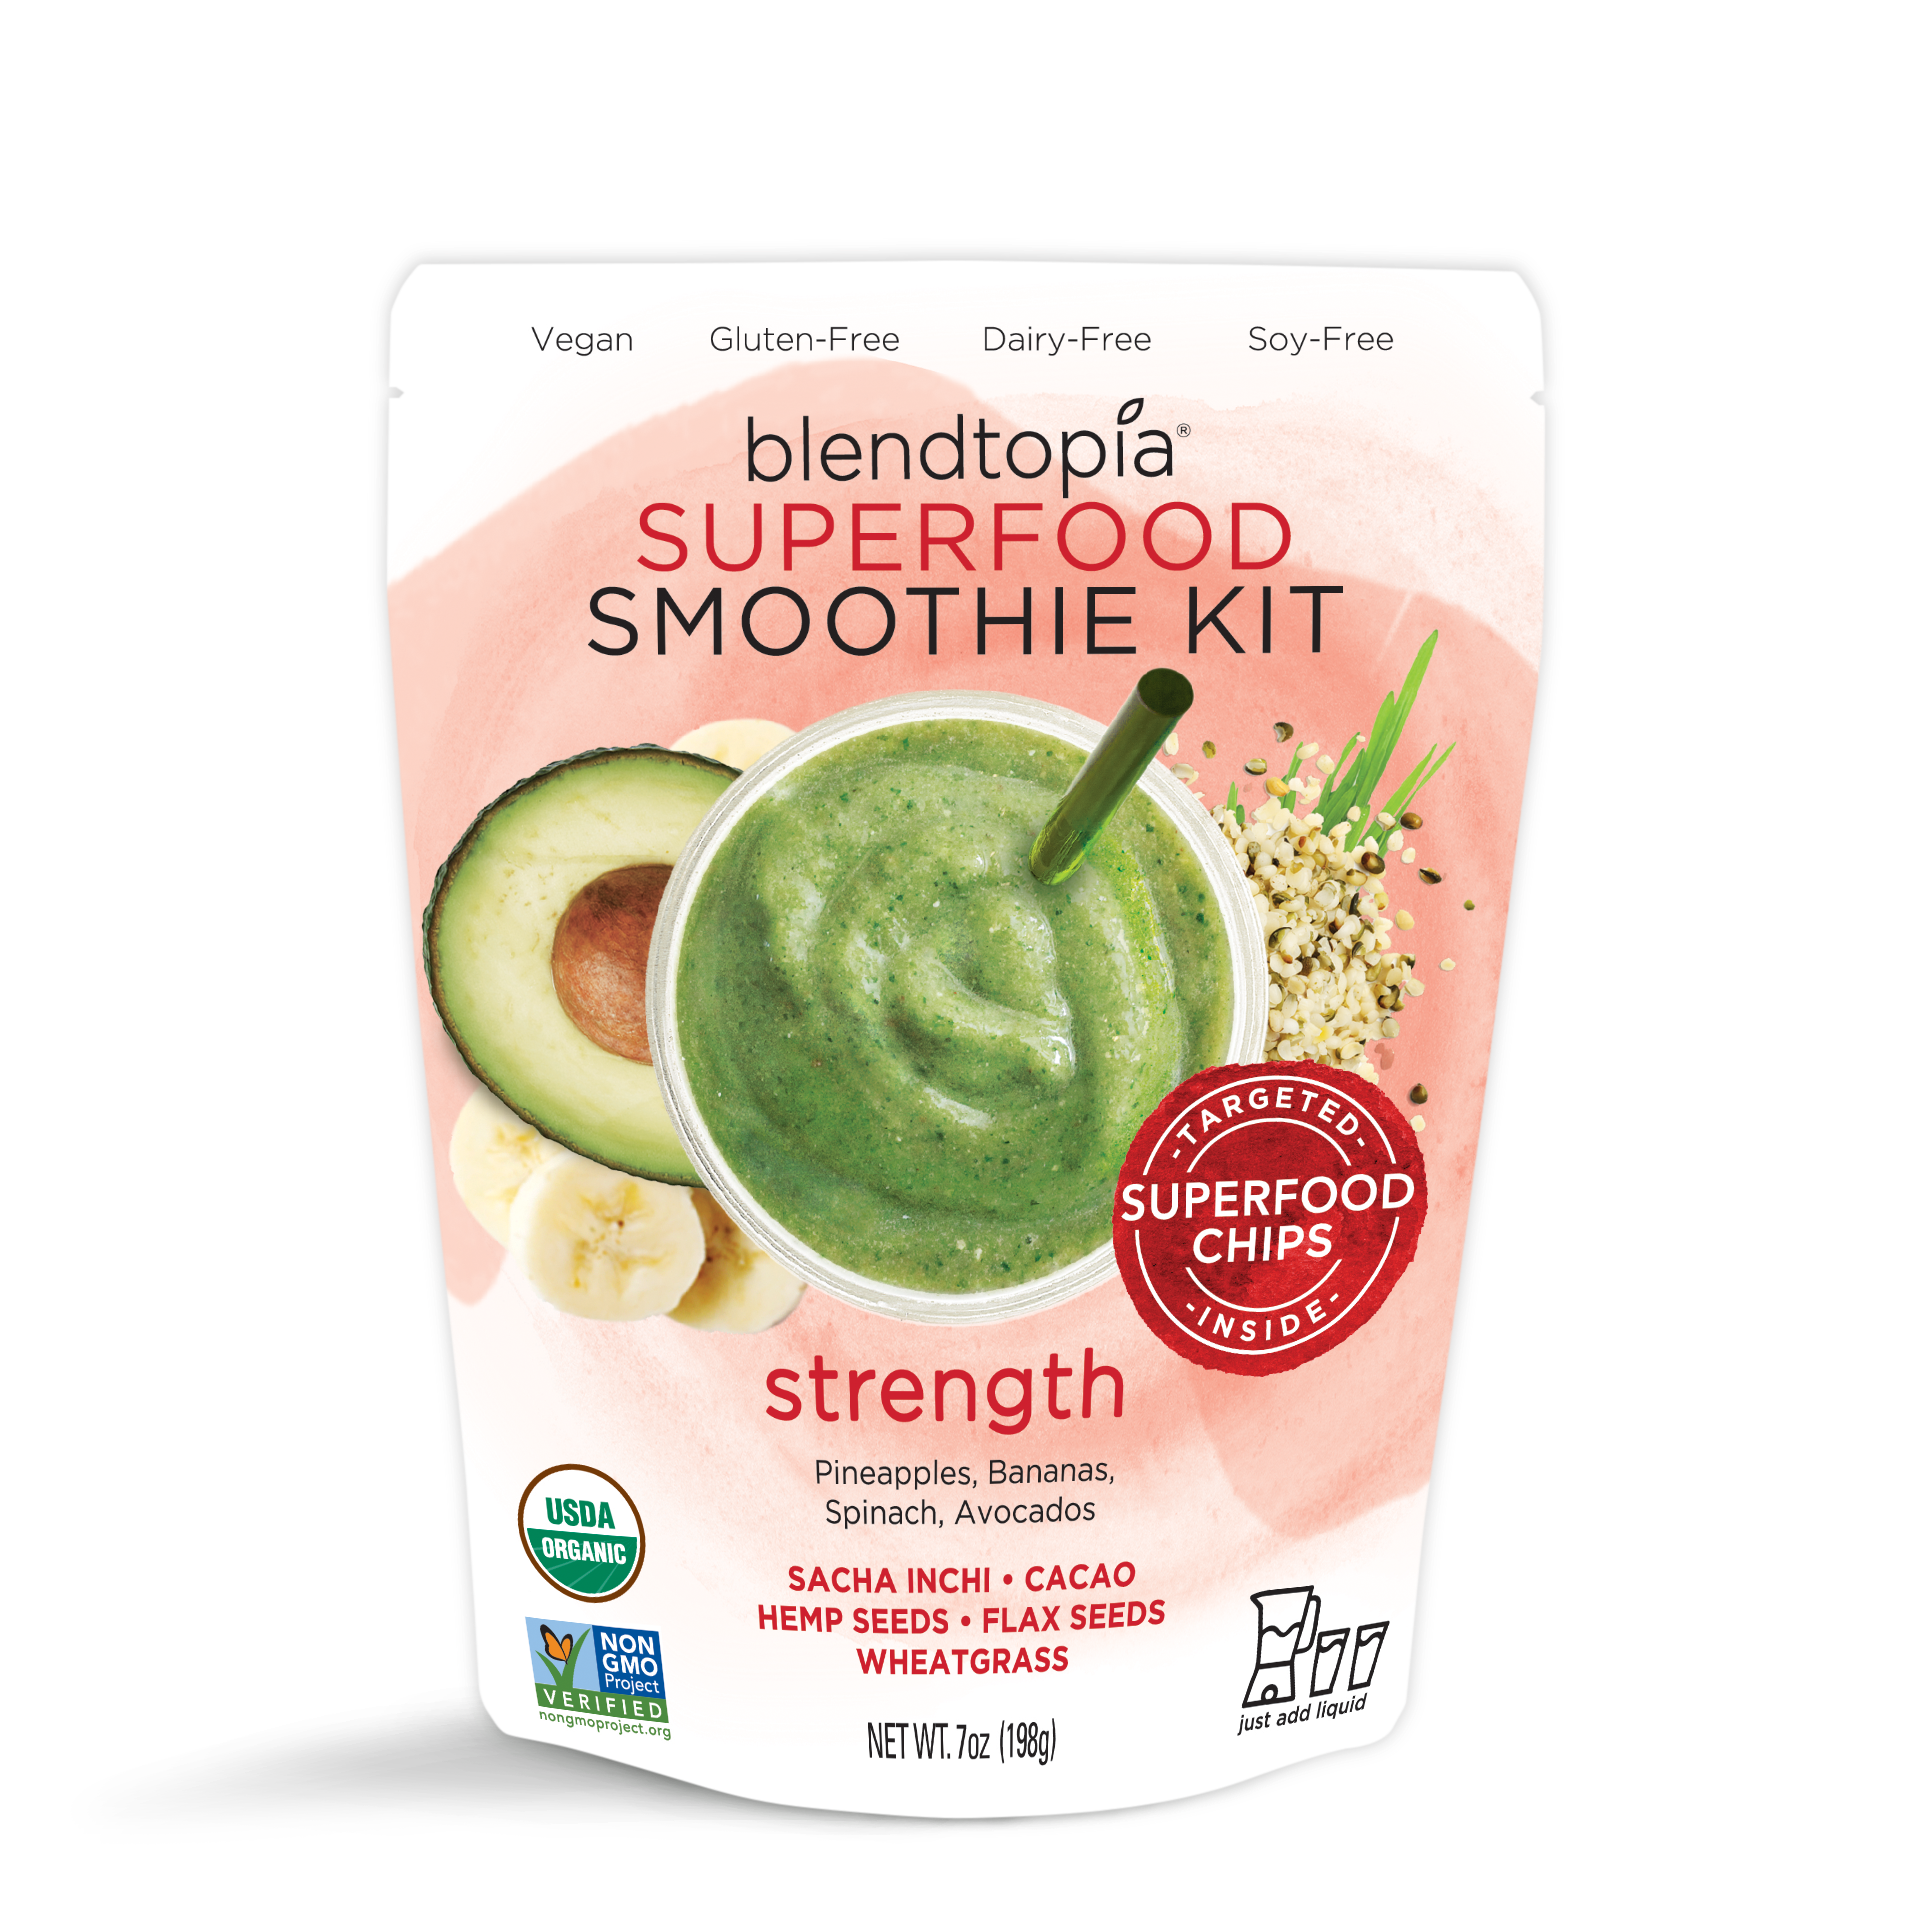 flax seed smoothie kit best with almond milk, vitamin c, protein 